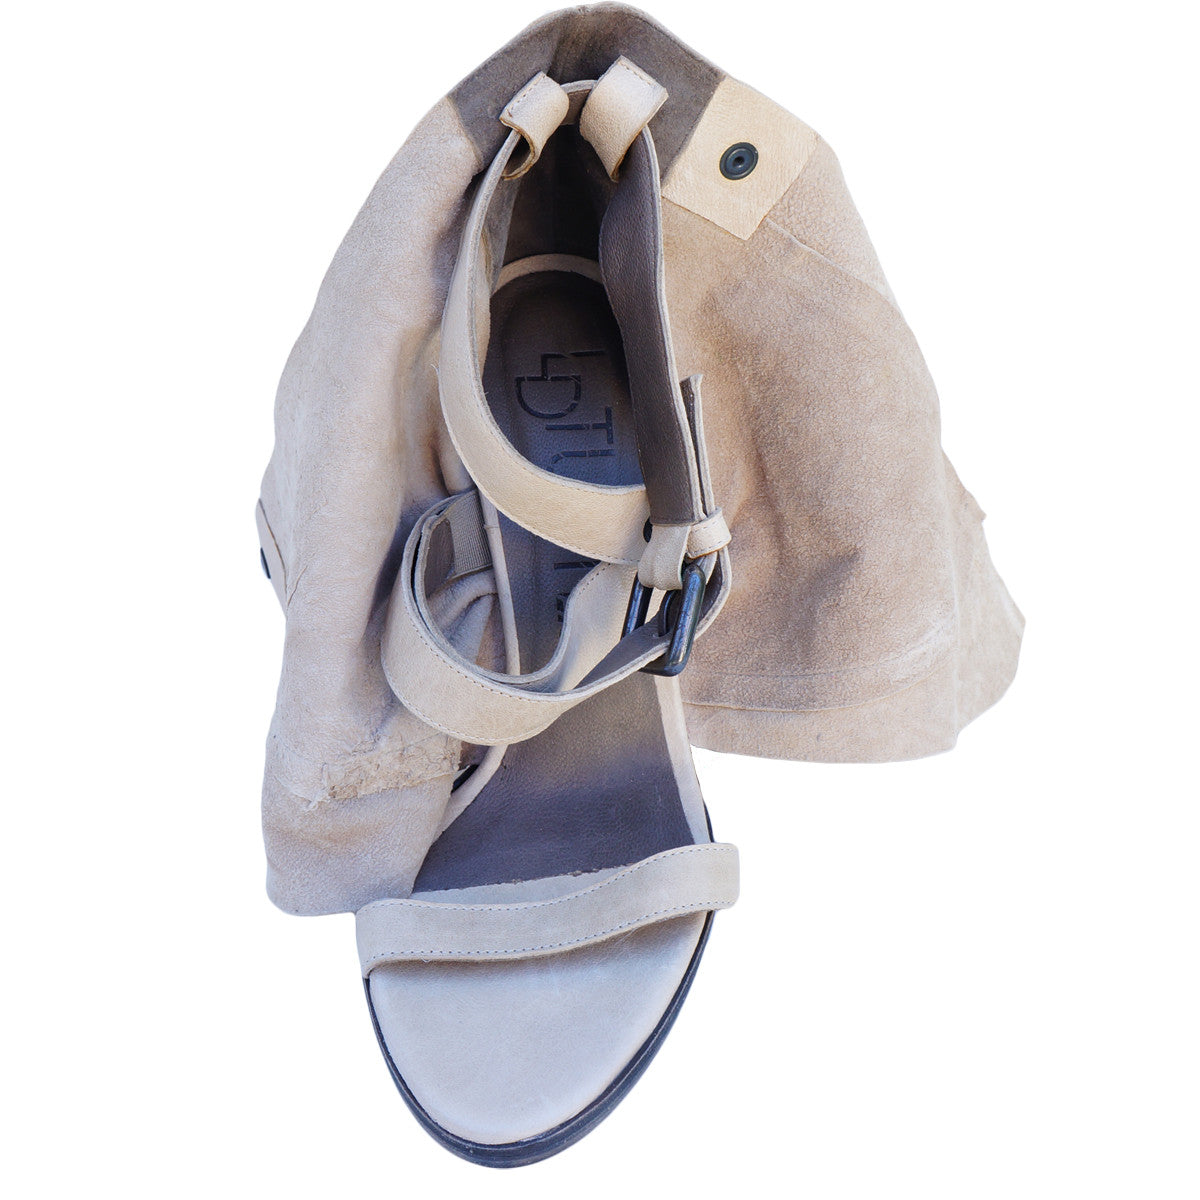 LD TUTTLE DISTRESSED LEATHER WRAPPED SANDALS - leefluxury.com